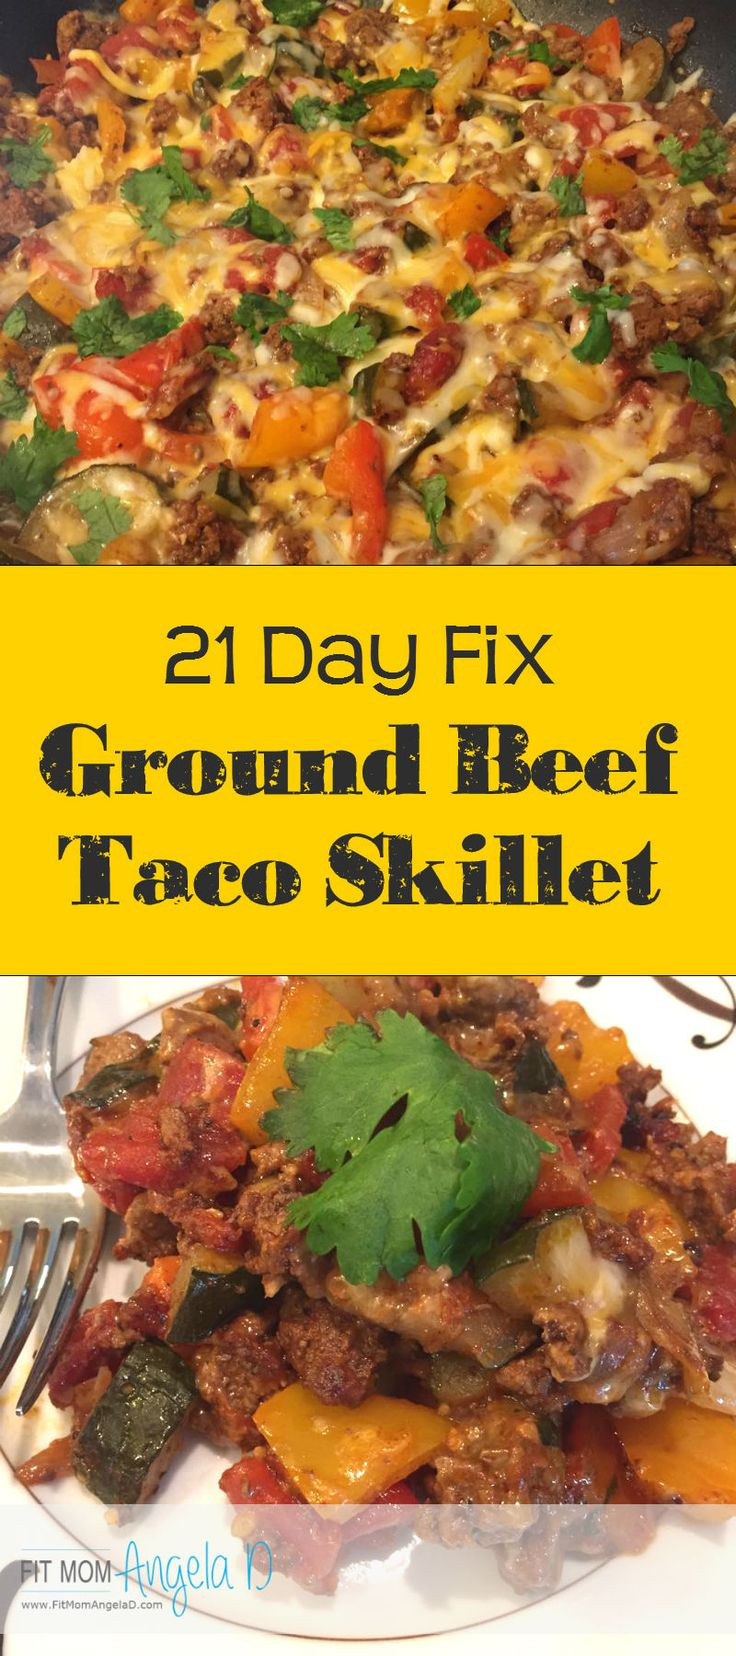 Healthy Dinner Ideas With Ground Beef
 78 ideas about Healthy Ground Beef on Pinterest